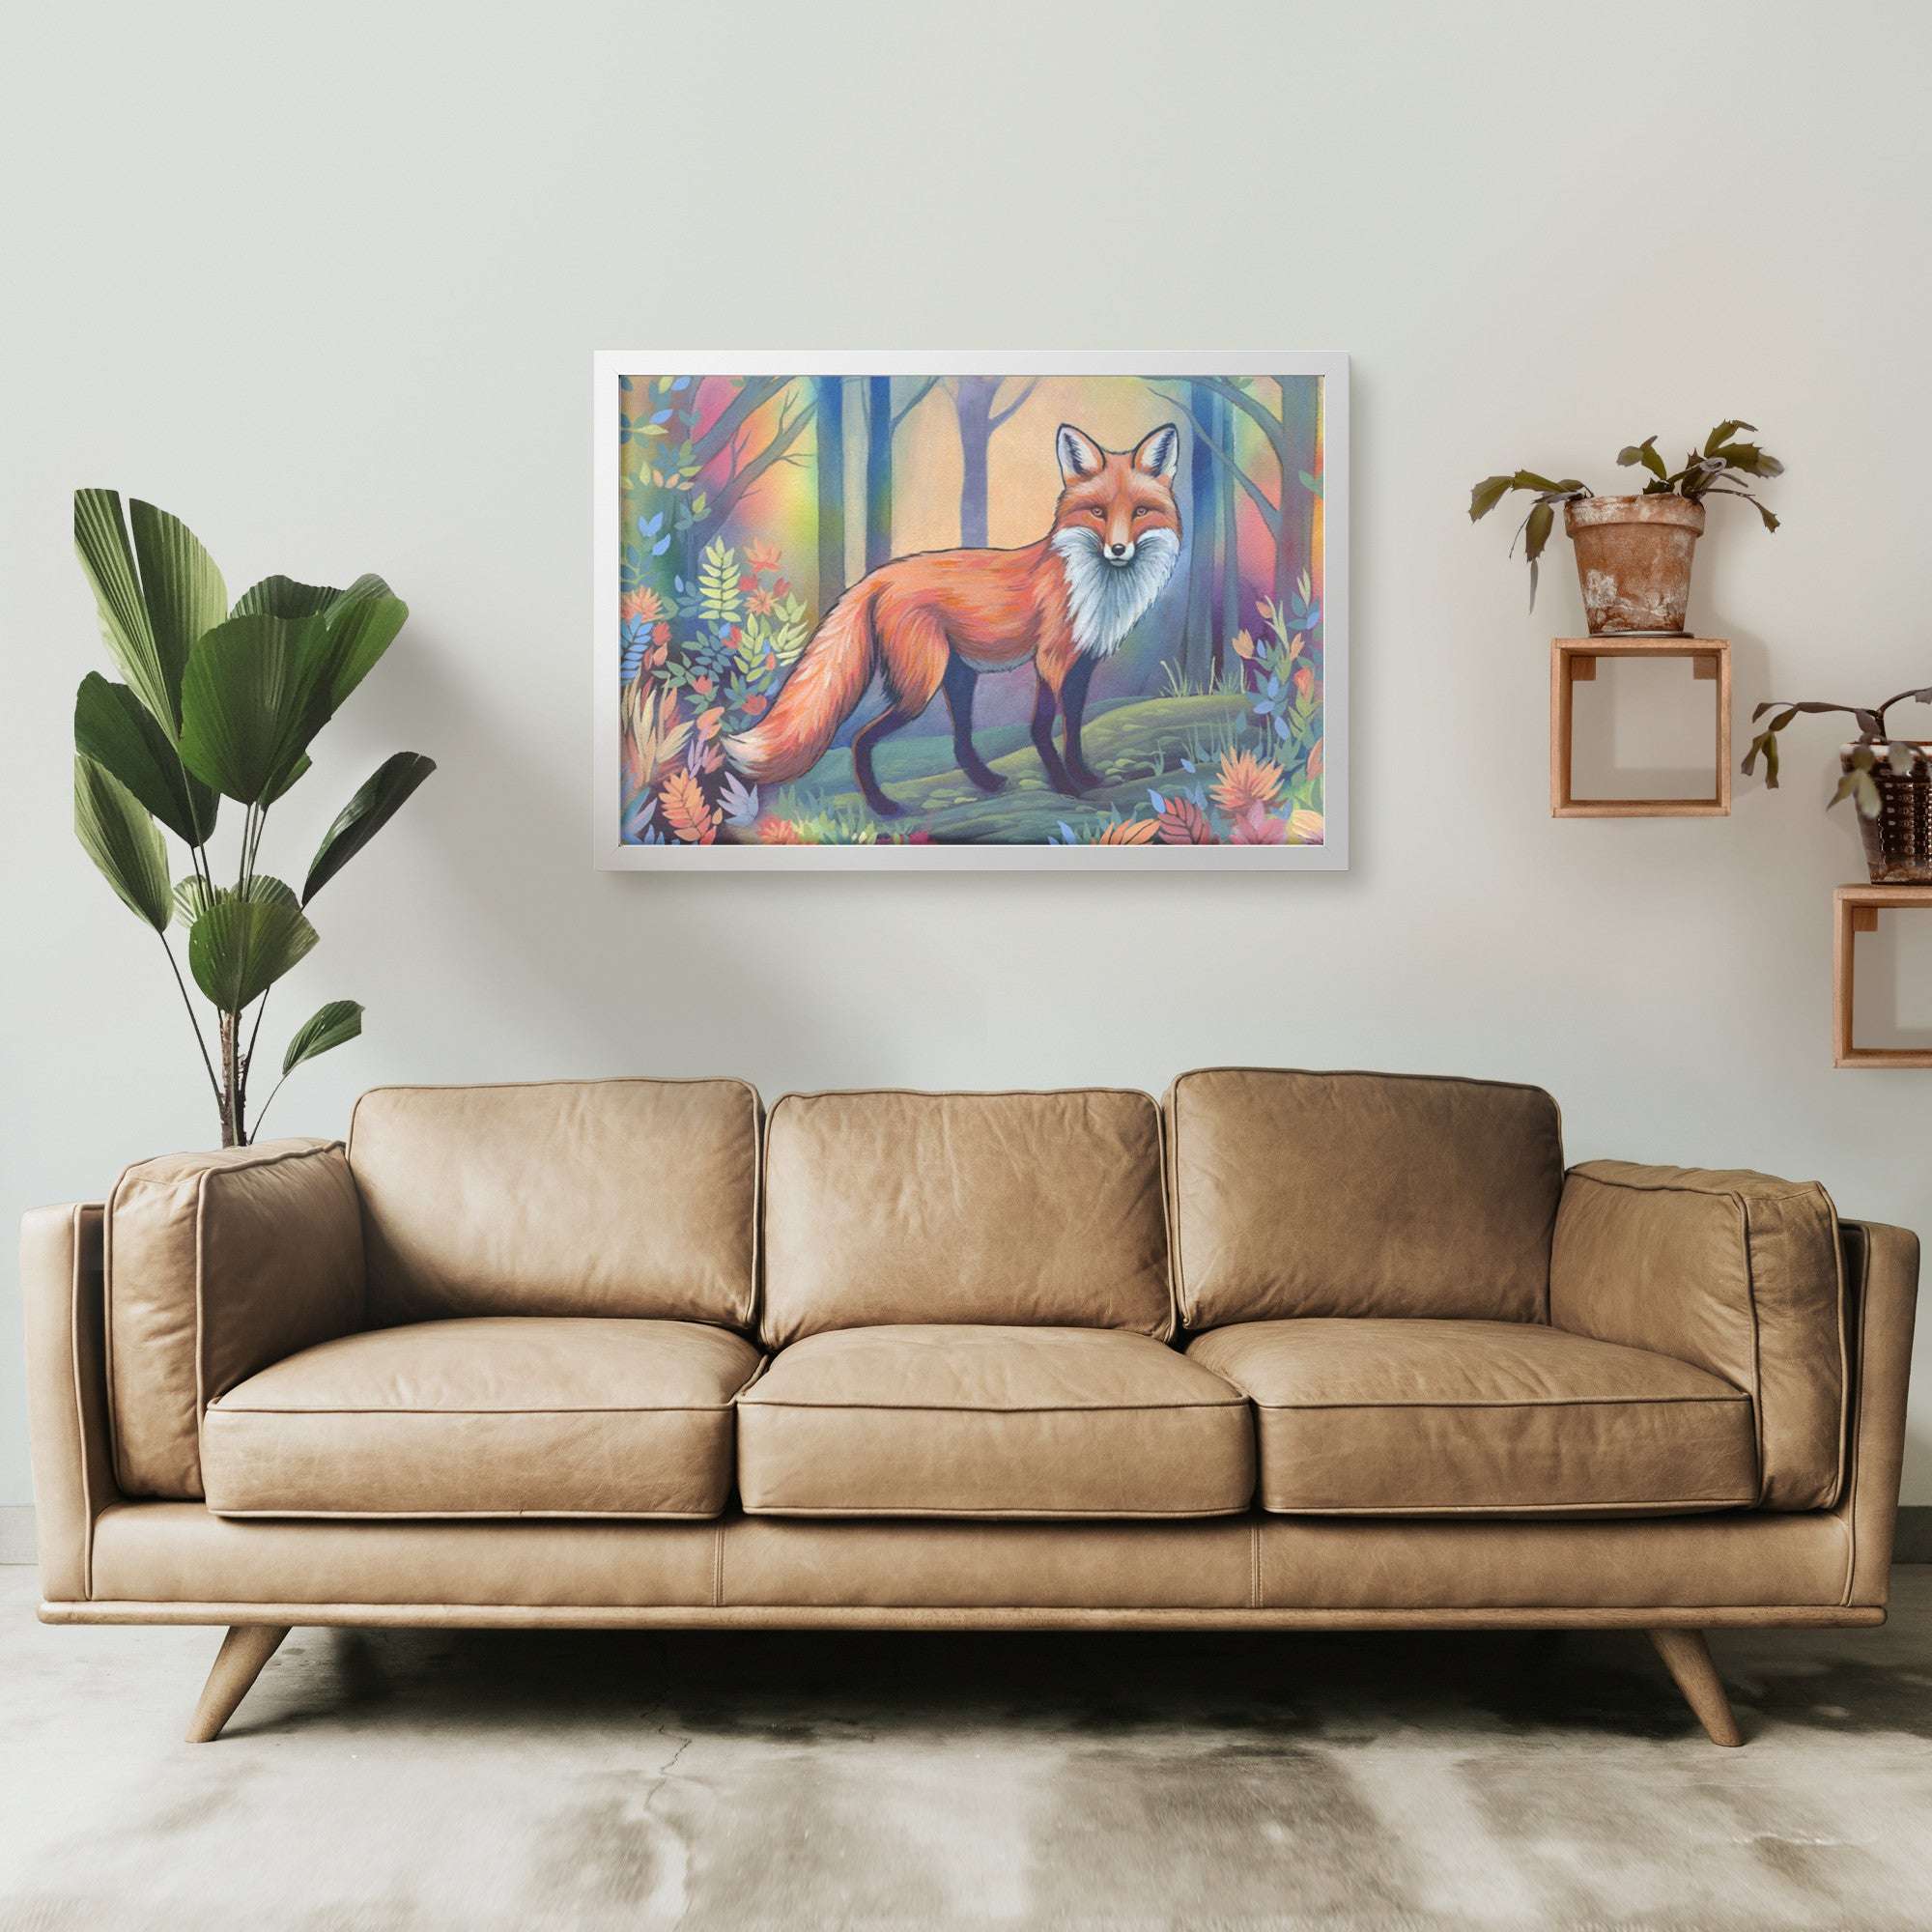 A modern living room with a beige sofa and a Framed Fox Art Print hung above it, depicting a colorful fox in a forest.